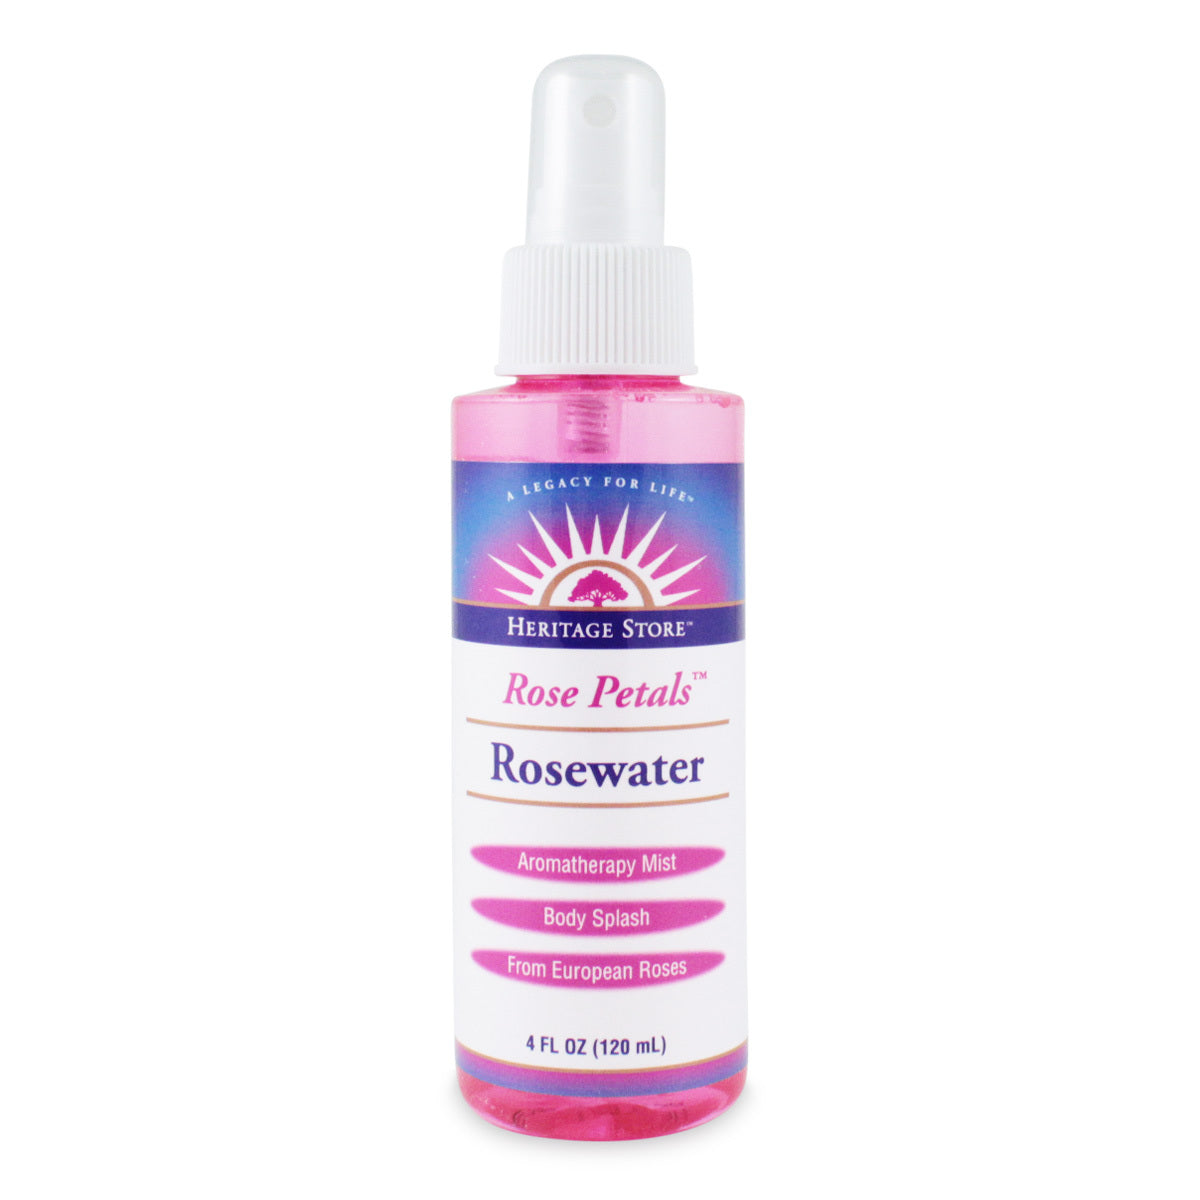 Primary image of Rosewater in Pump Spray